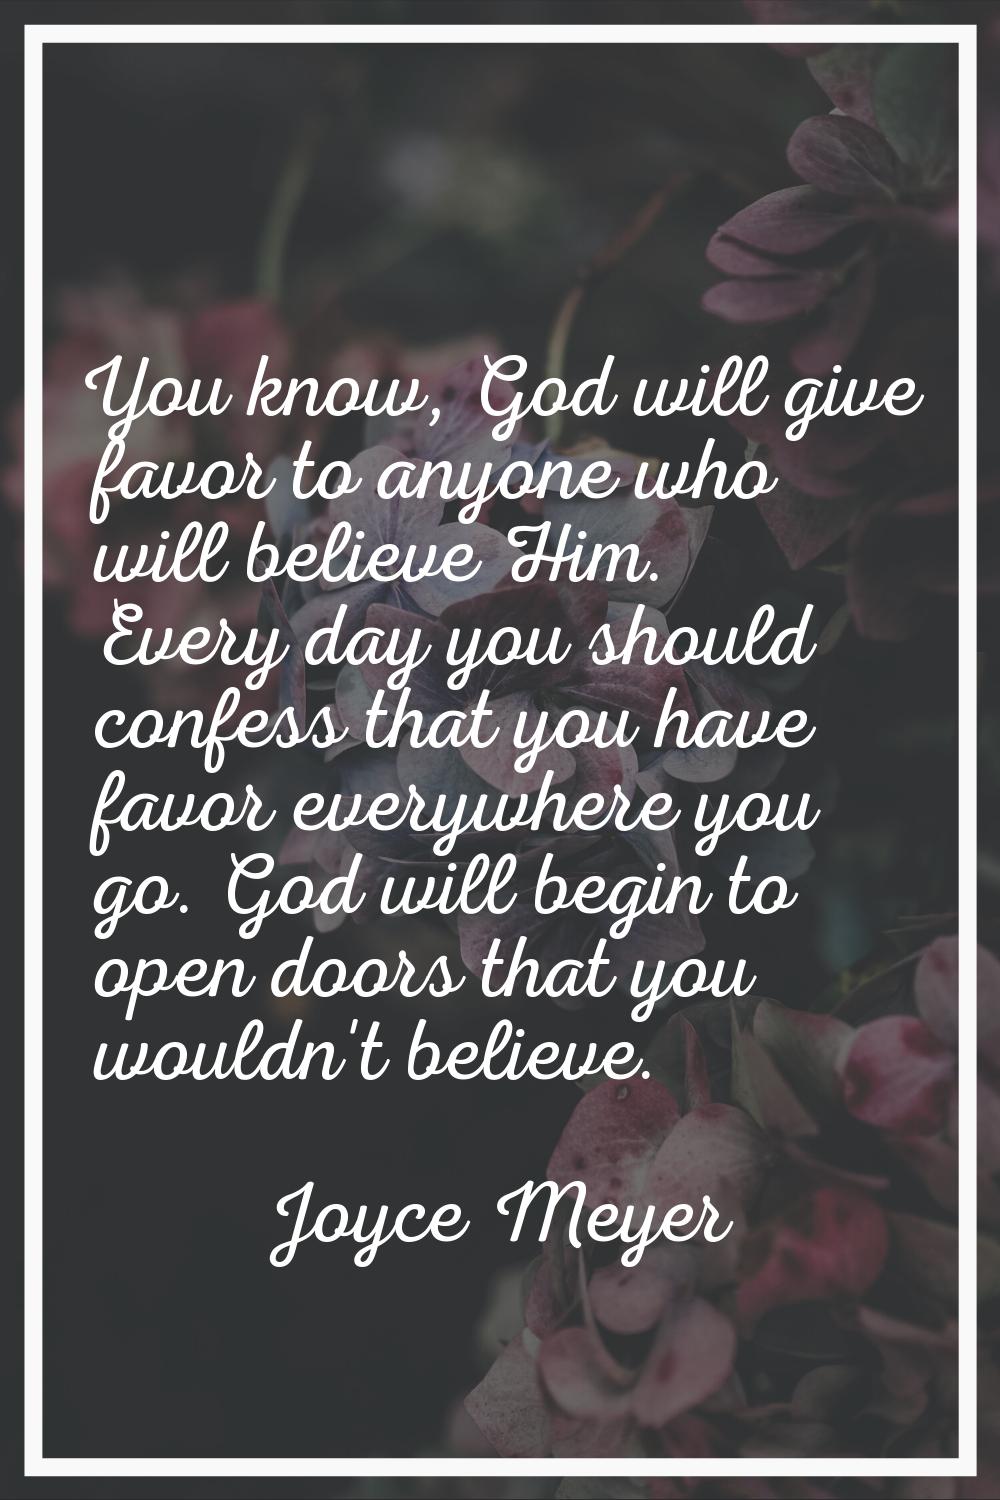 You know, God will give favor to anyone who will believe Him. Every day you should confess that you